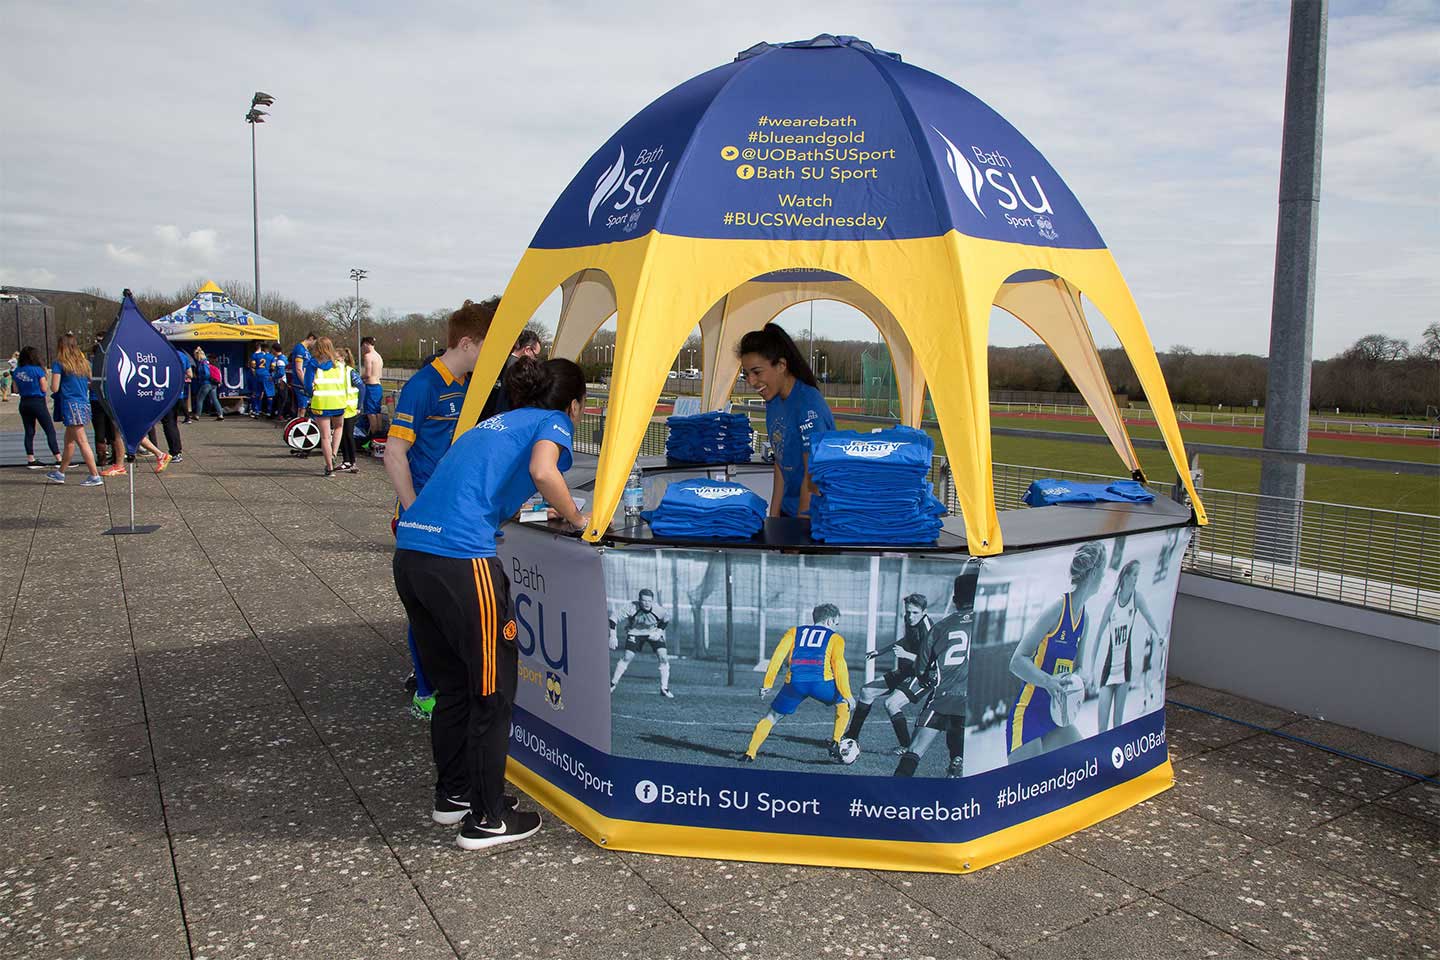 A big dome pop up banner branded with blue and yellow colours, with a woman inside promoting Bath SU sport and handing out branded t-shirts